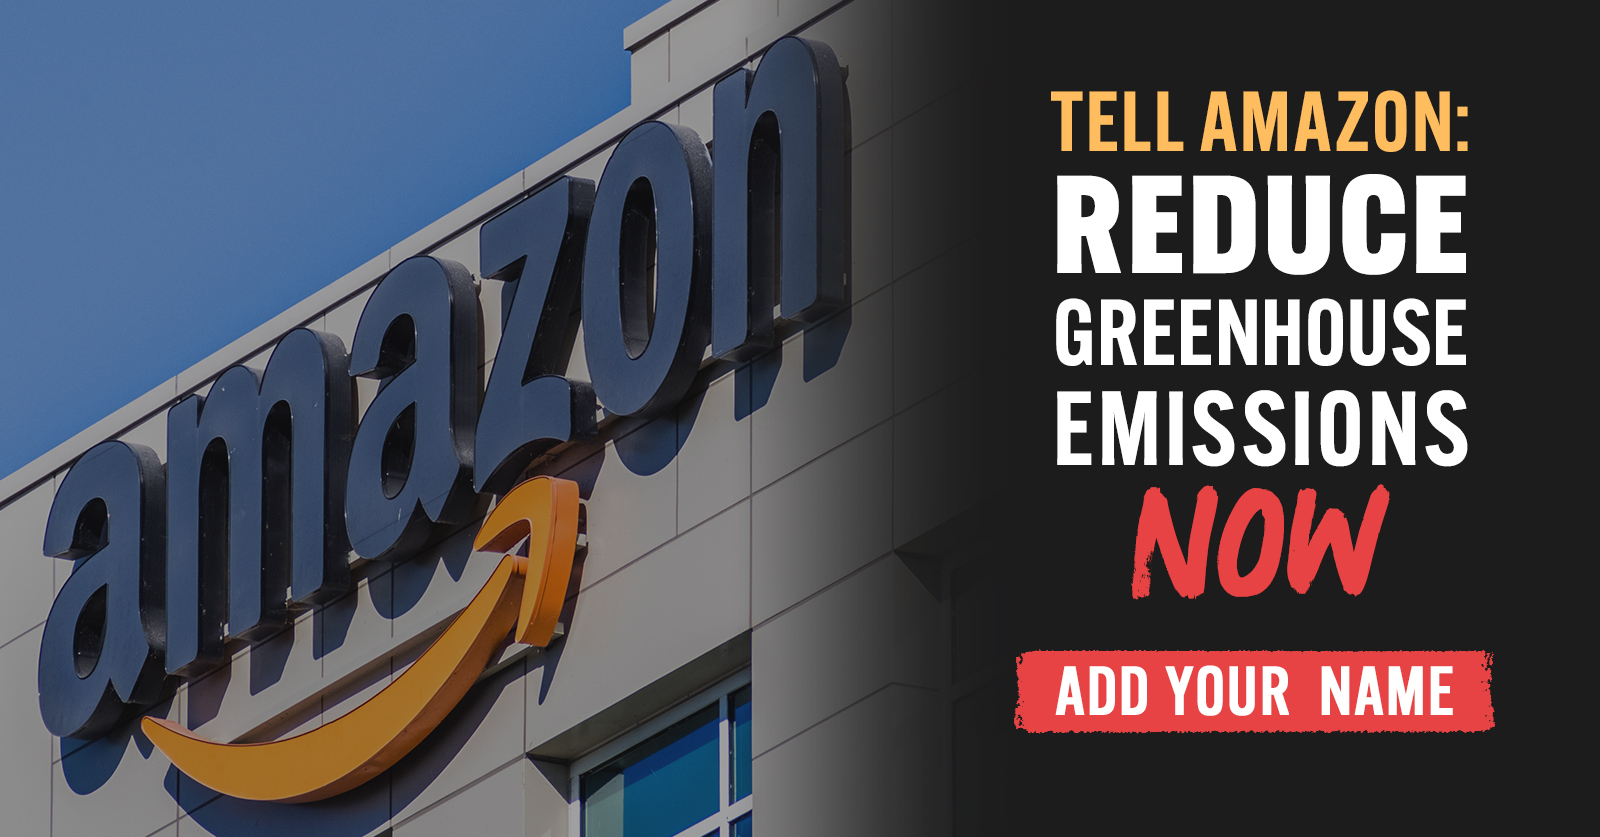 Tell Amazon to reduce greenhouse emissions now